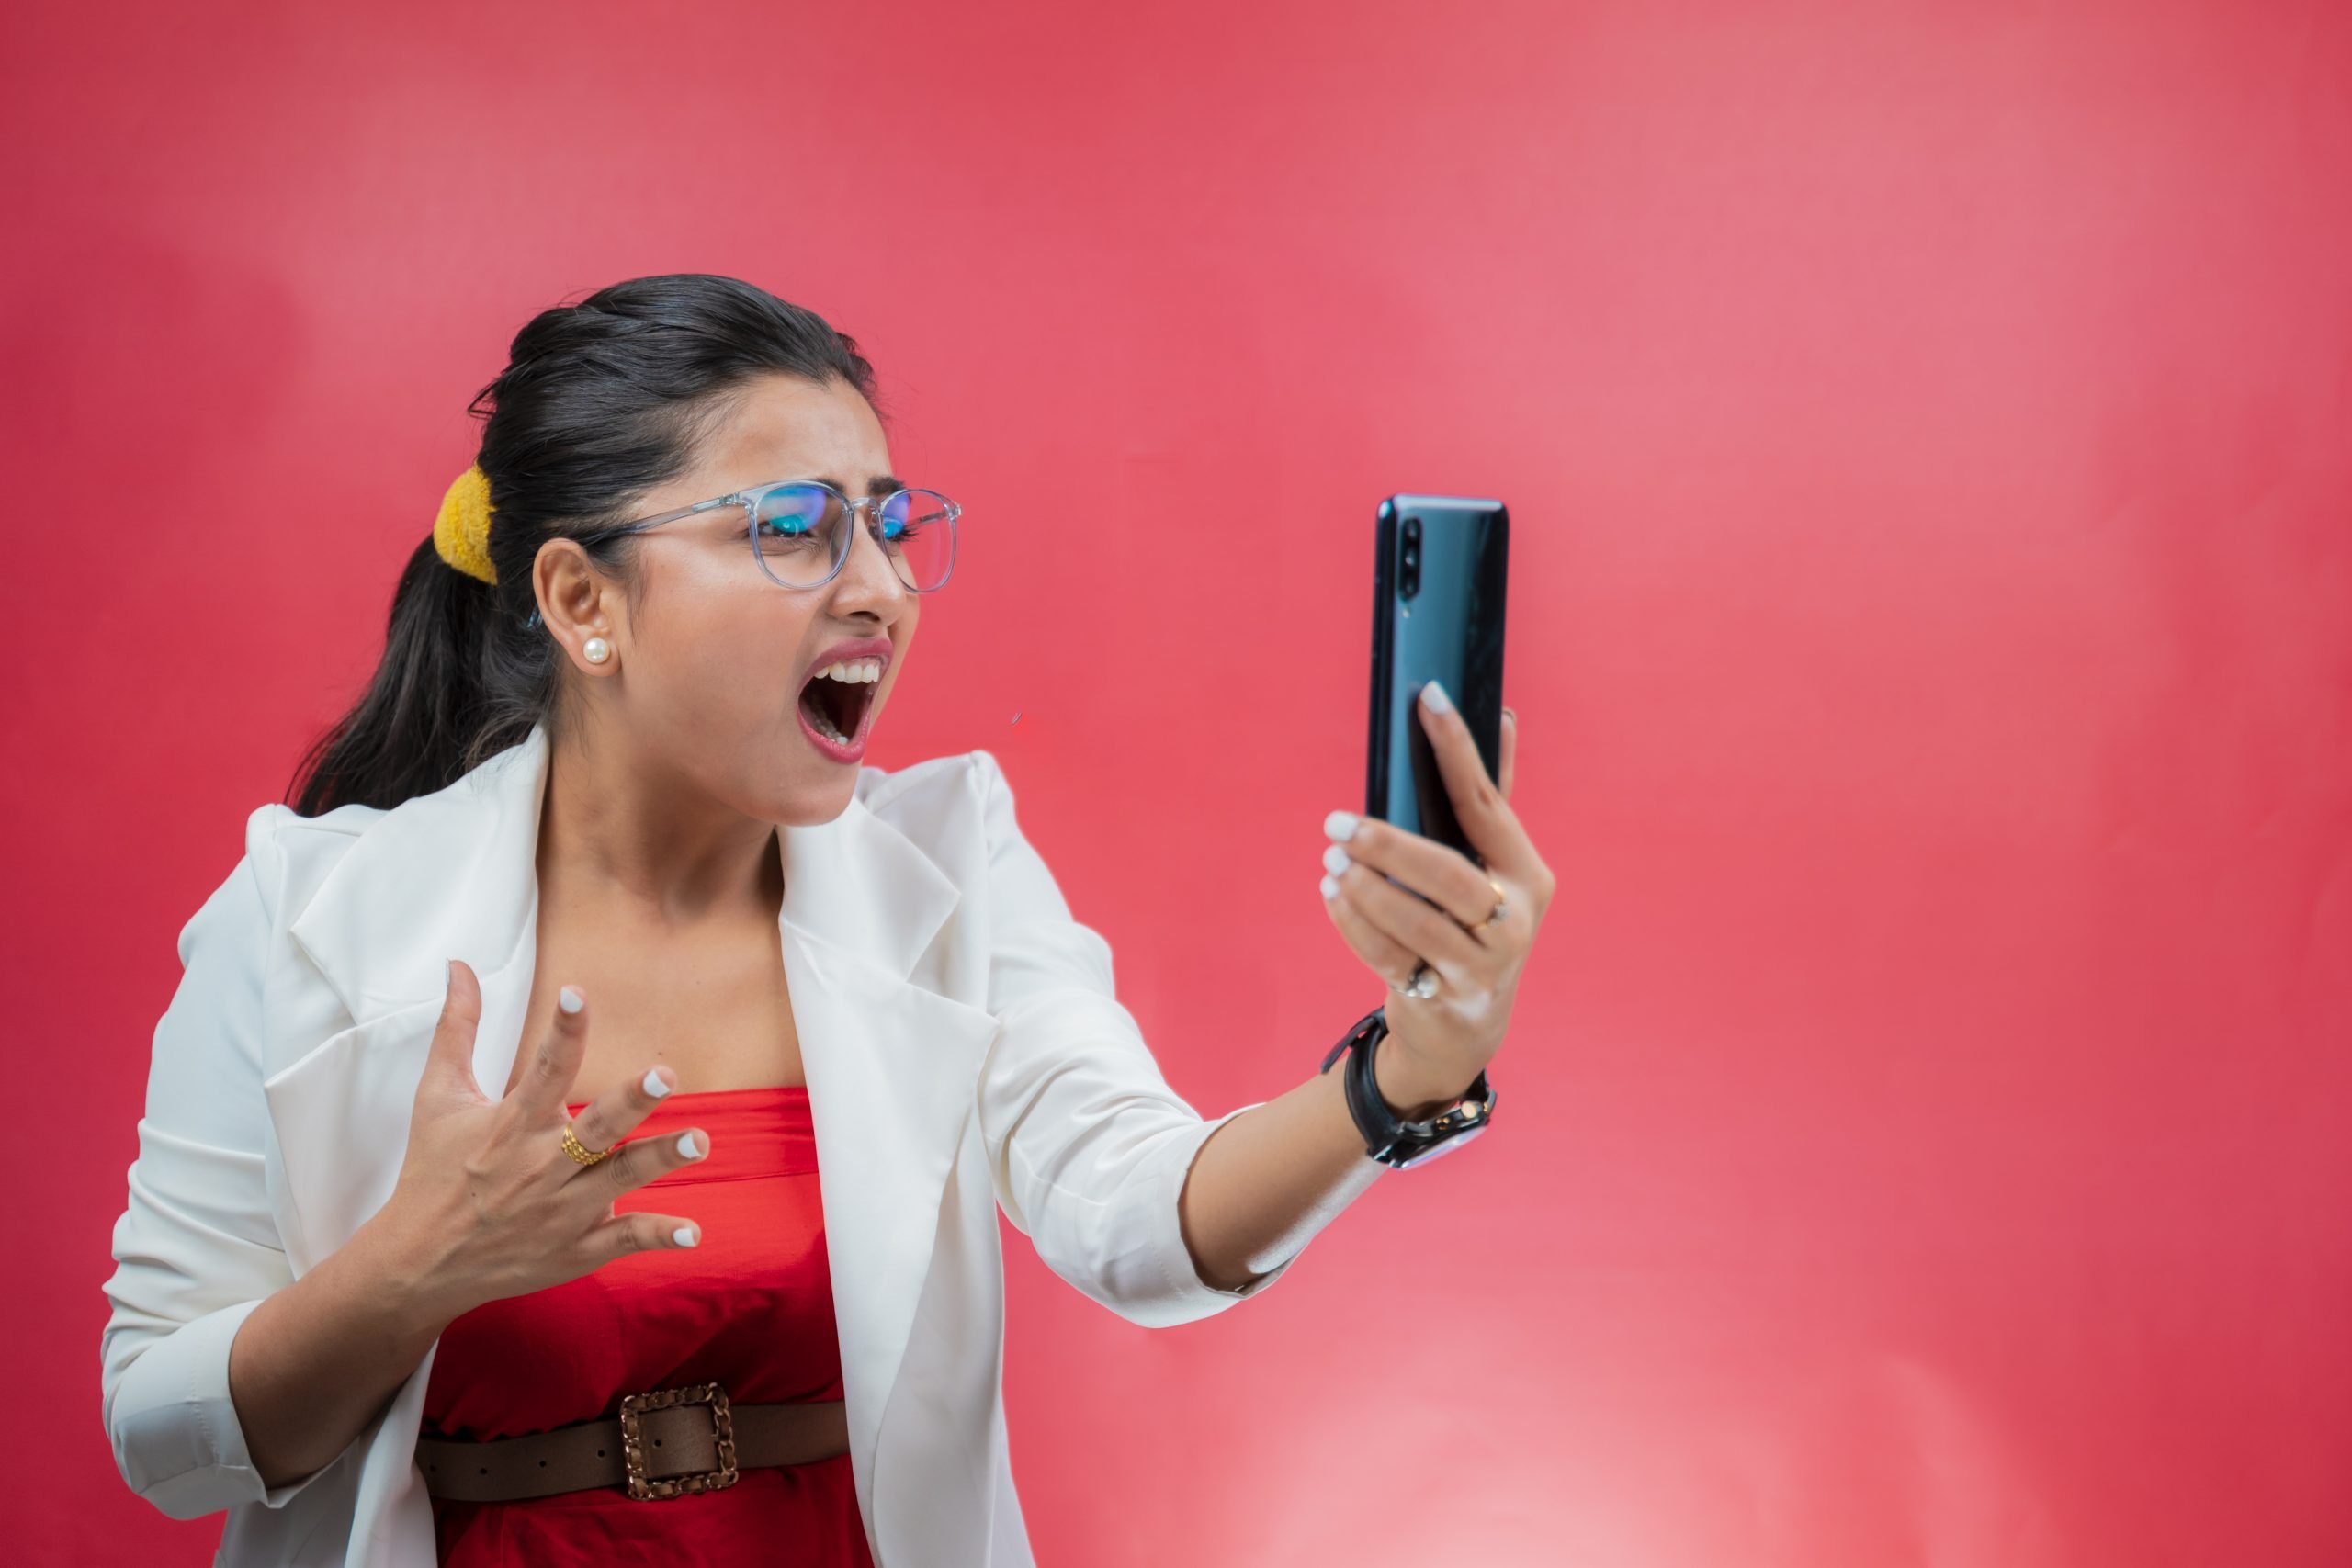 A photo of a woman looking shocked at her phone